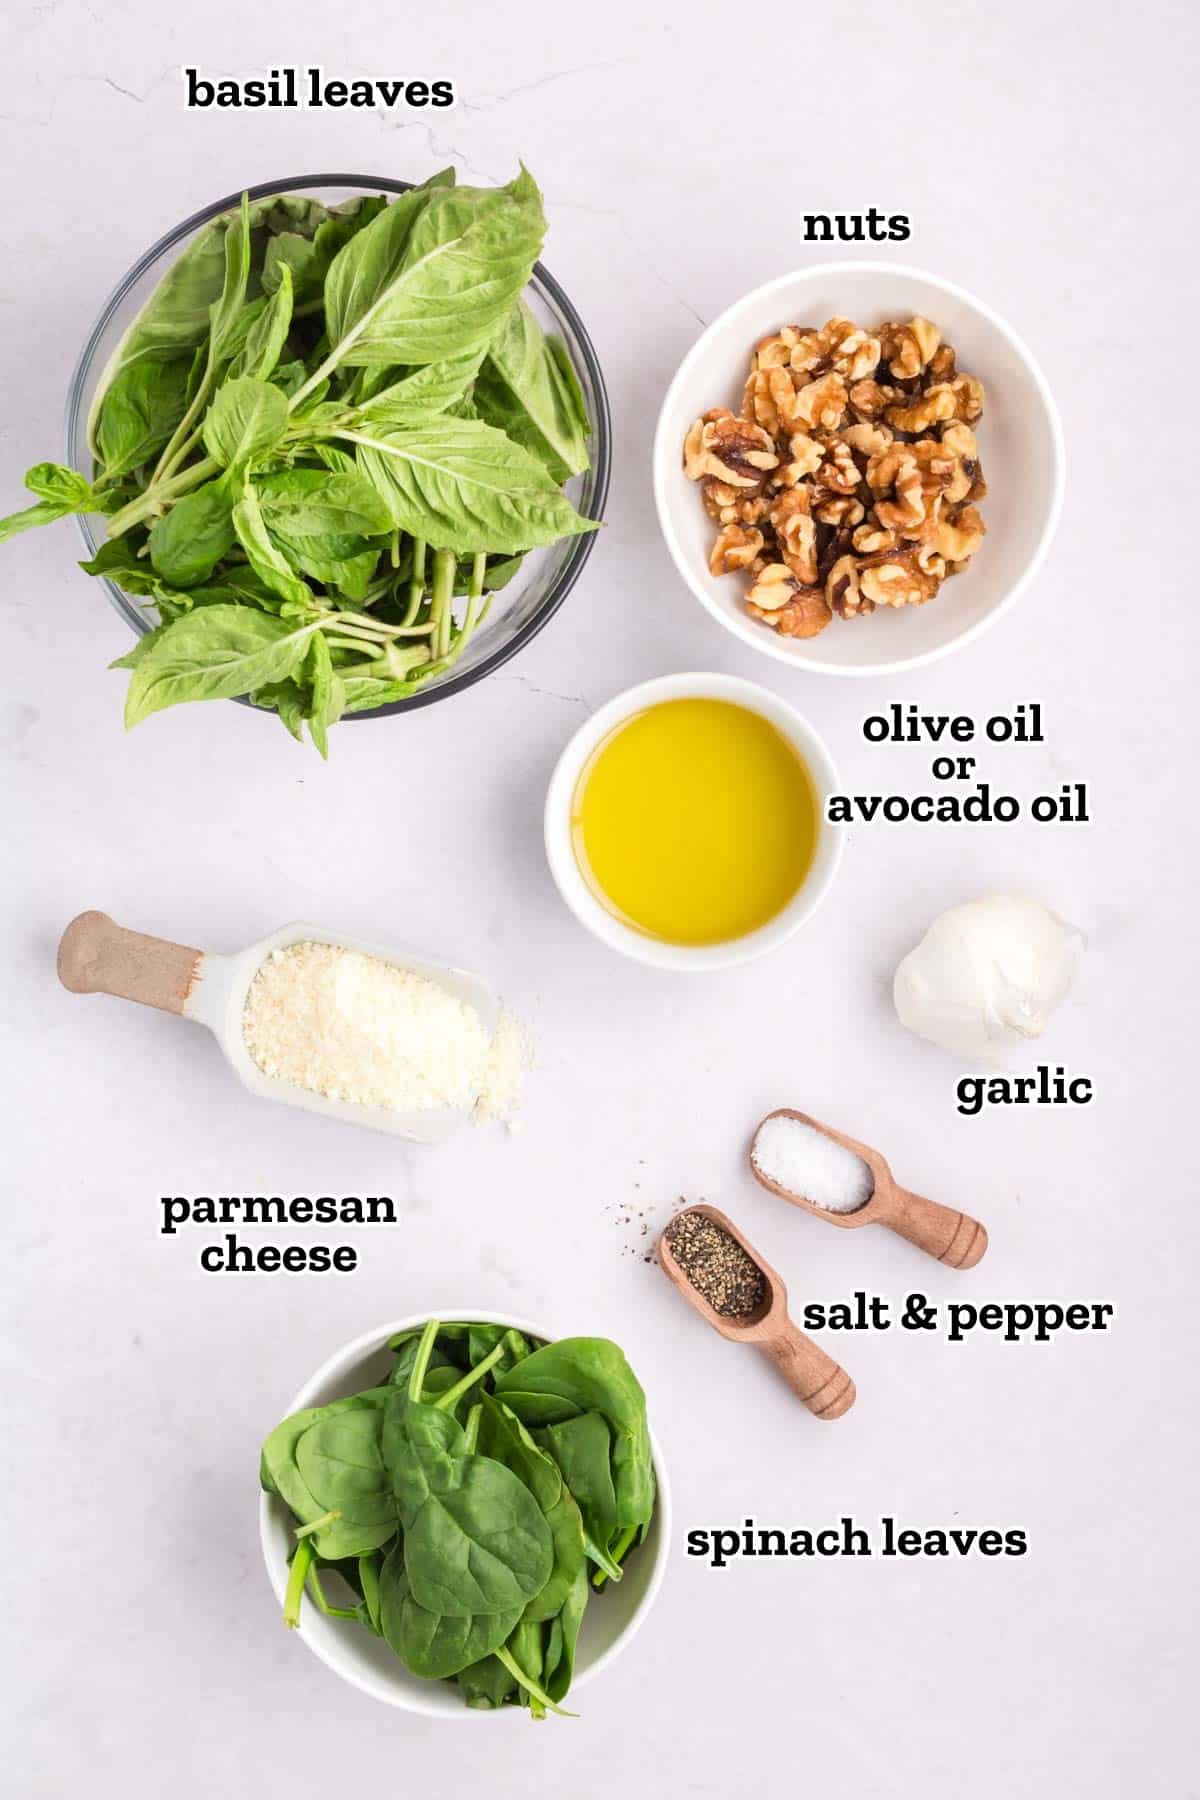 Labeled image of ingredients needed for homemade pesto sauce.